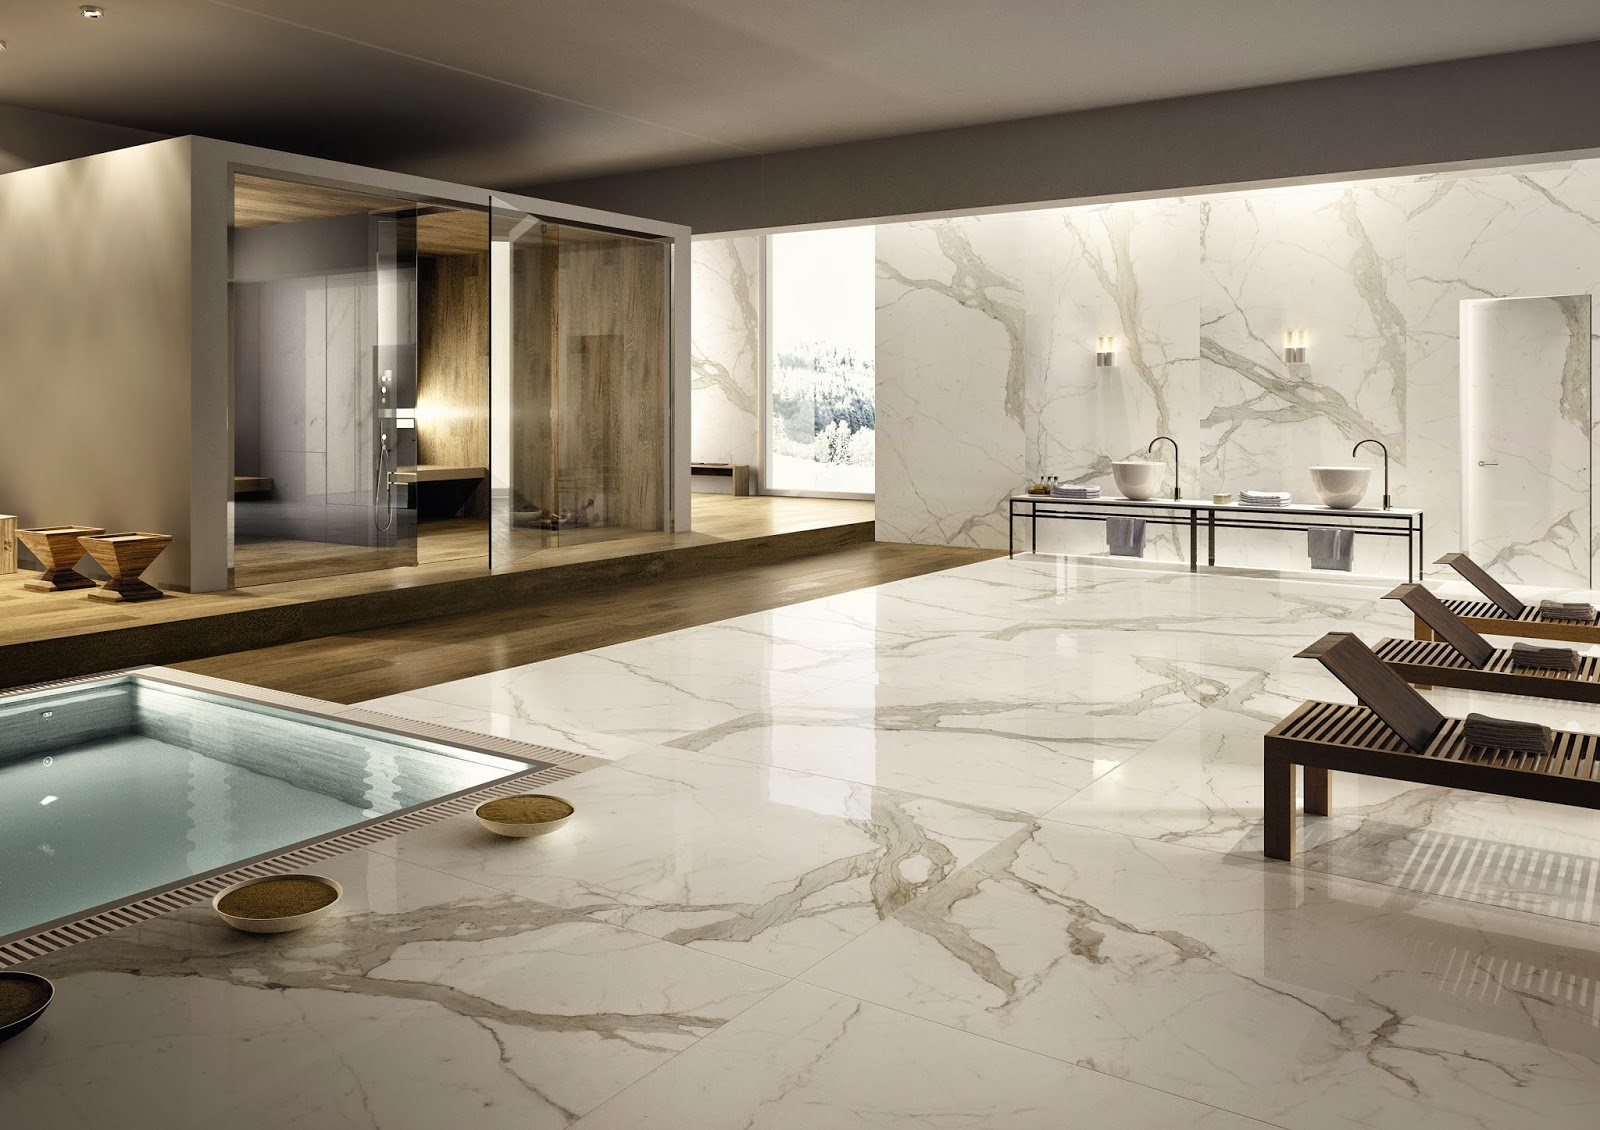 amazing interior design with calacatta marble flooring and tile wall mount and hottubs beautiful calacatta marble for interior design calcutta gold marble marble countertops cost calcutta with rega